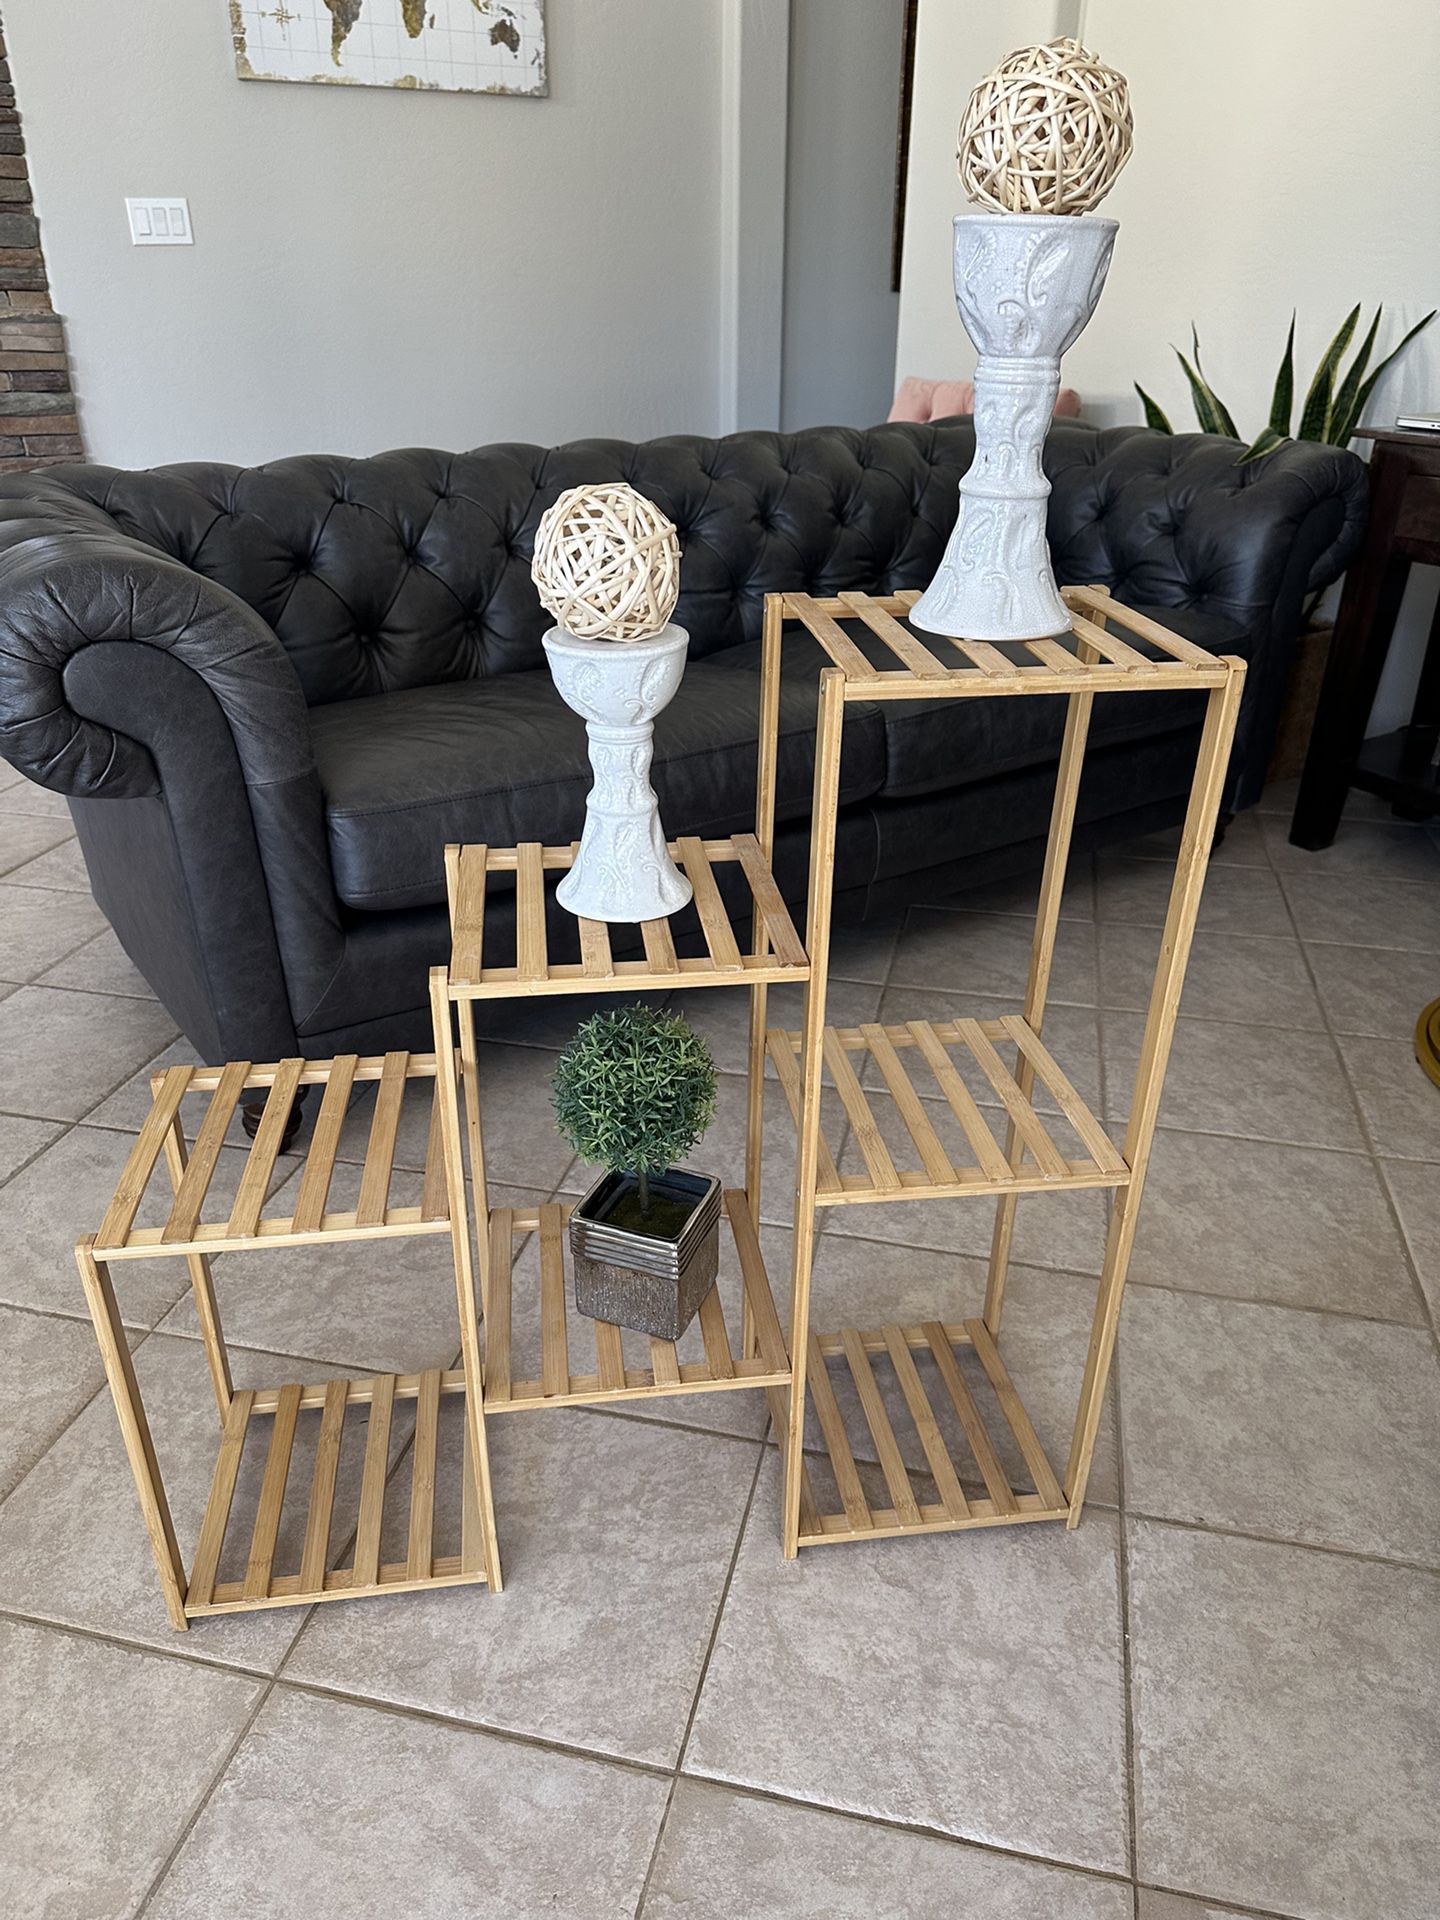 Wood Plant Stand Home Decor / Bamboo Shelf / Storage Plant Stand Pot Holder / 32” Wide By 31-1/2” Tall By 10” Deep 